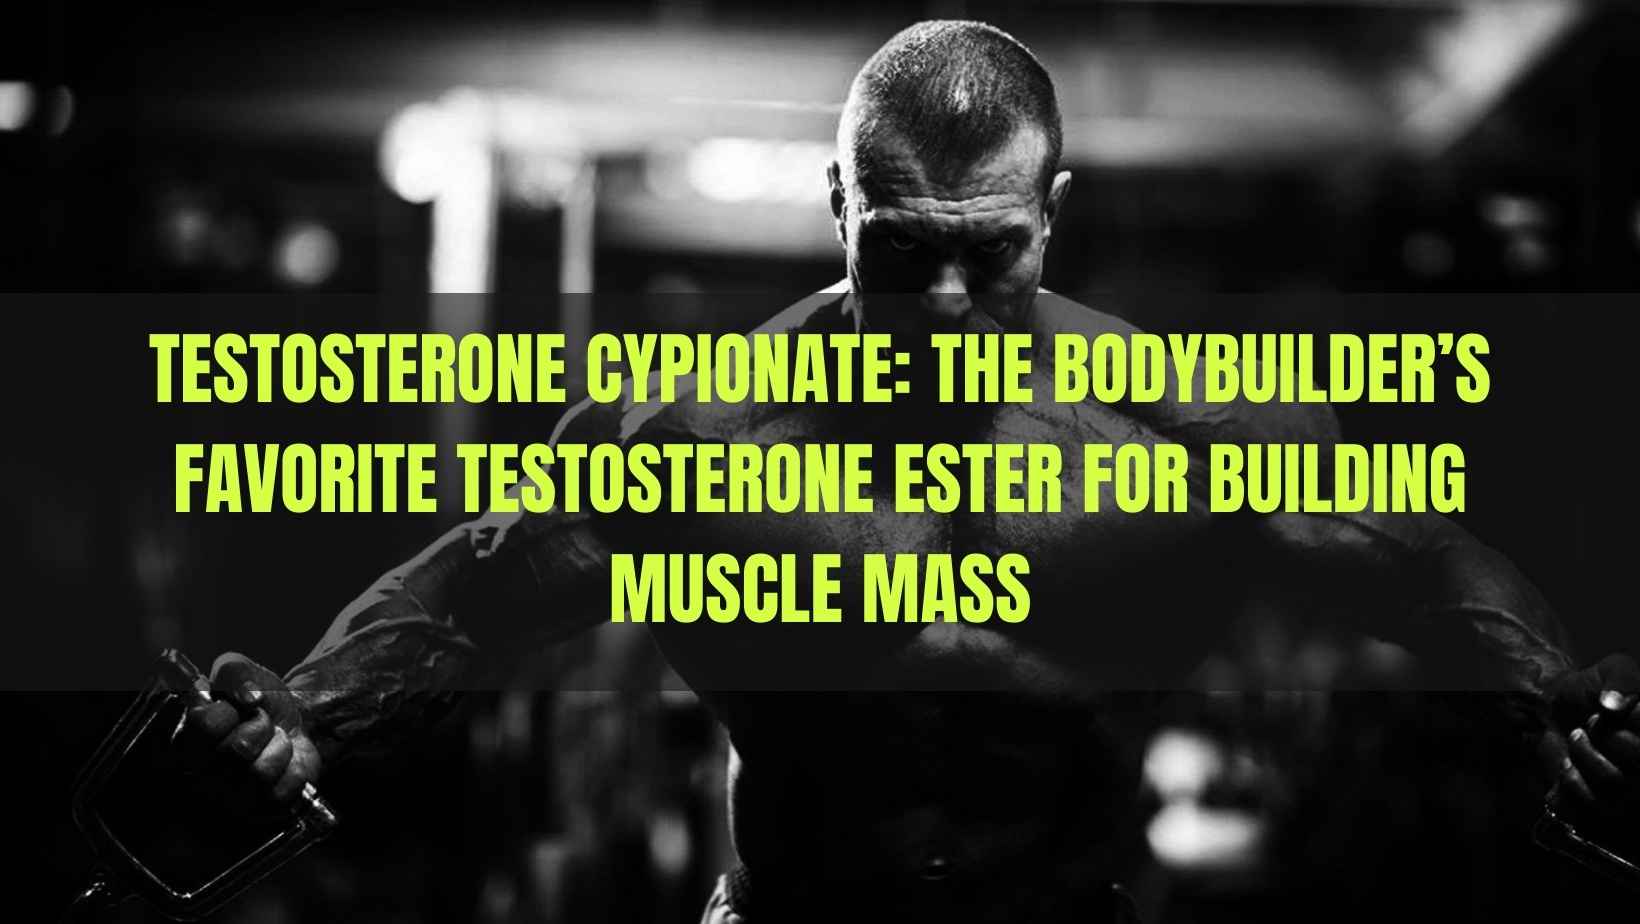 Now You Can Have Your Testosterone Cypionate Dosage for Lean Muscle Done Safely